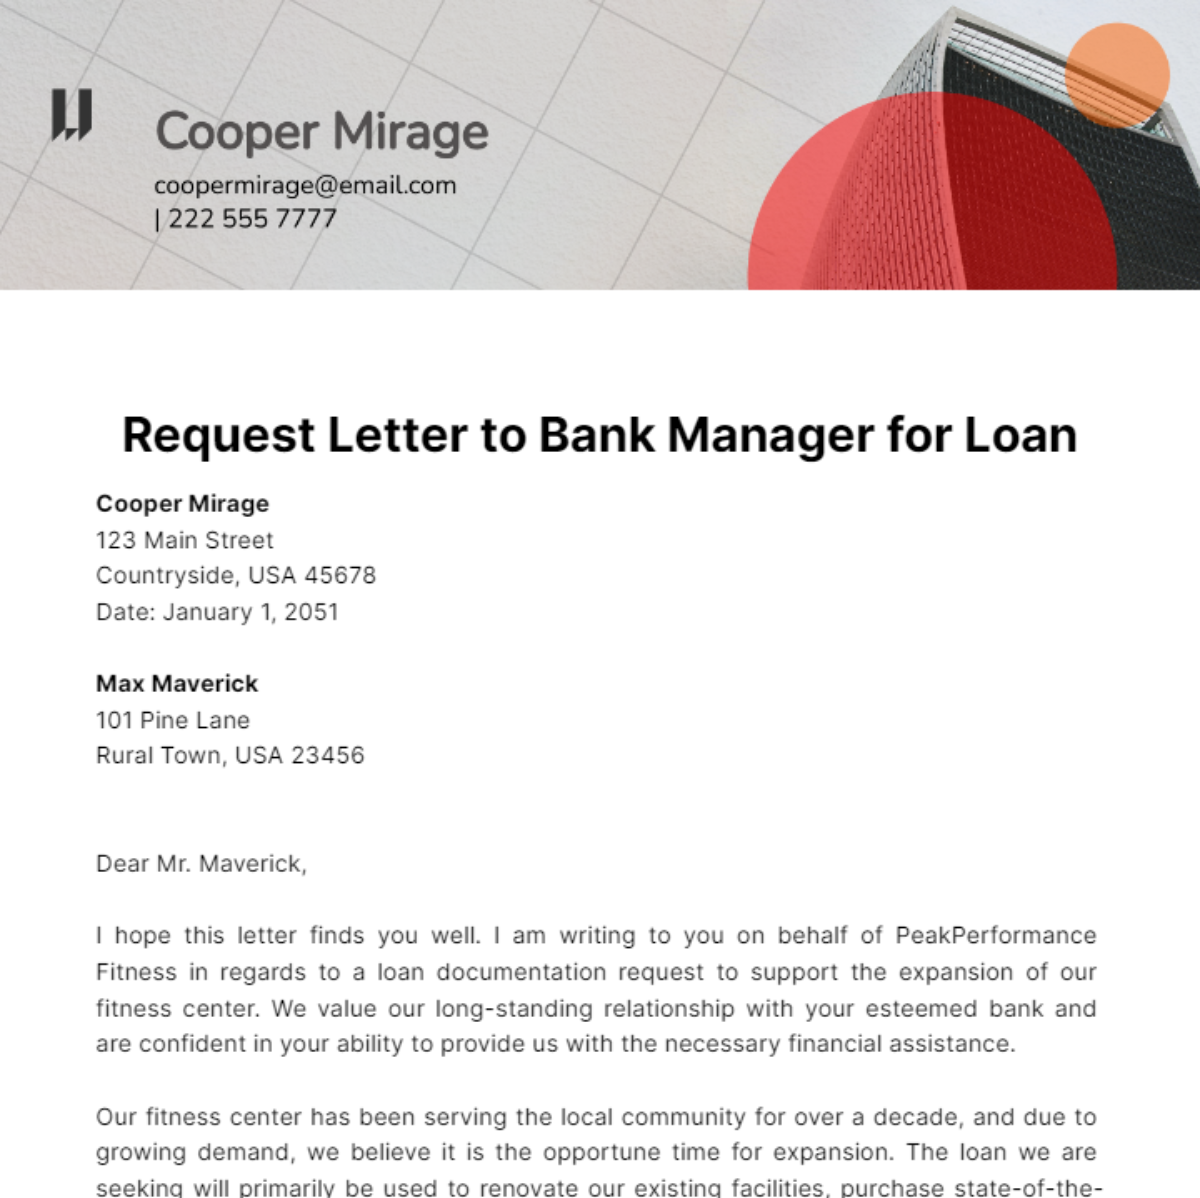 Request Letter to Bank Manager for Loan Template